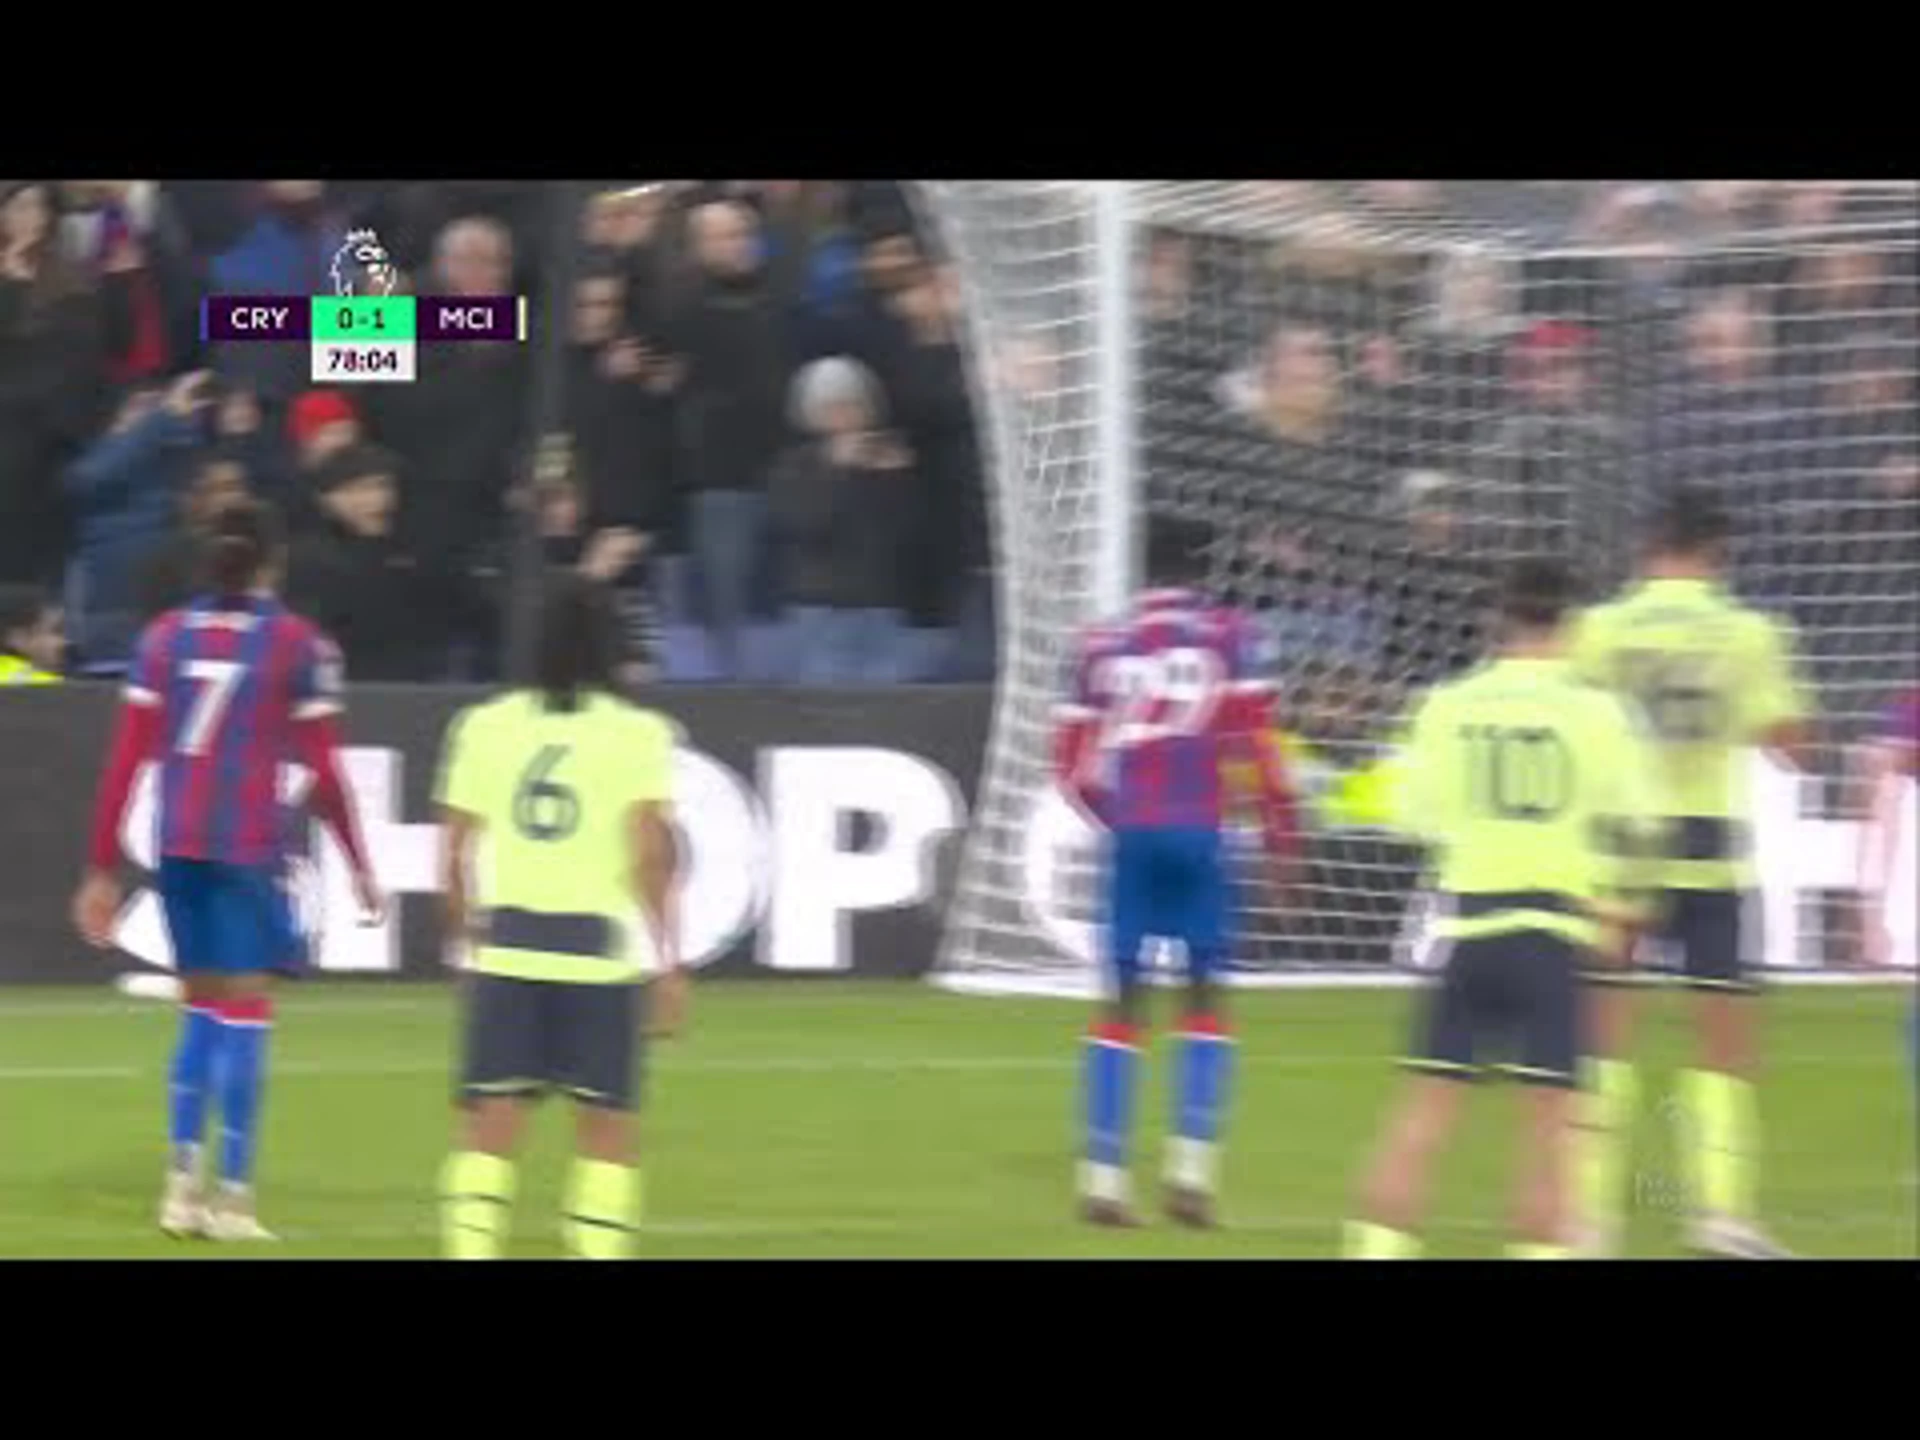 Erling Haaland with a Penalty Goal vs. Crystal Palace